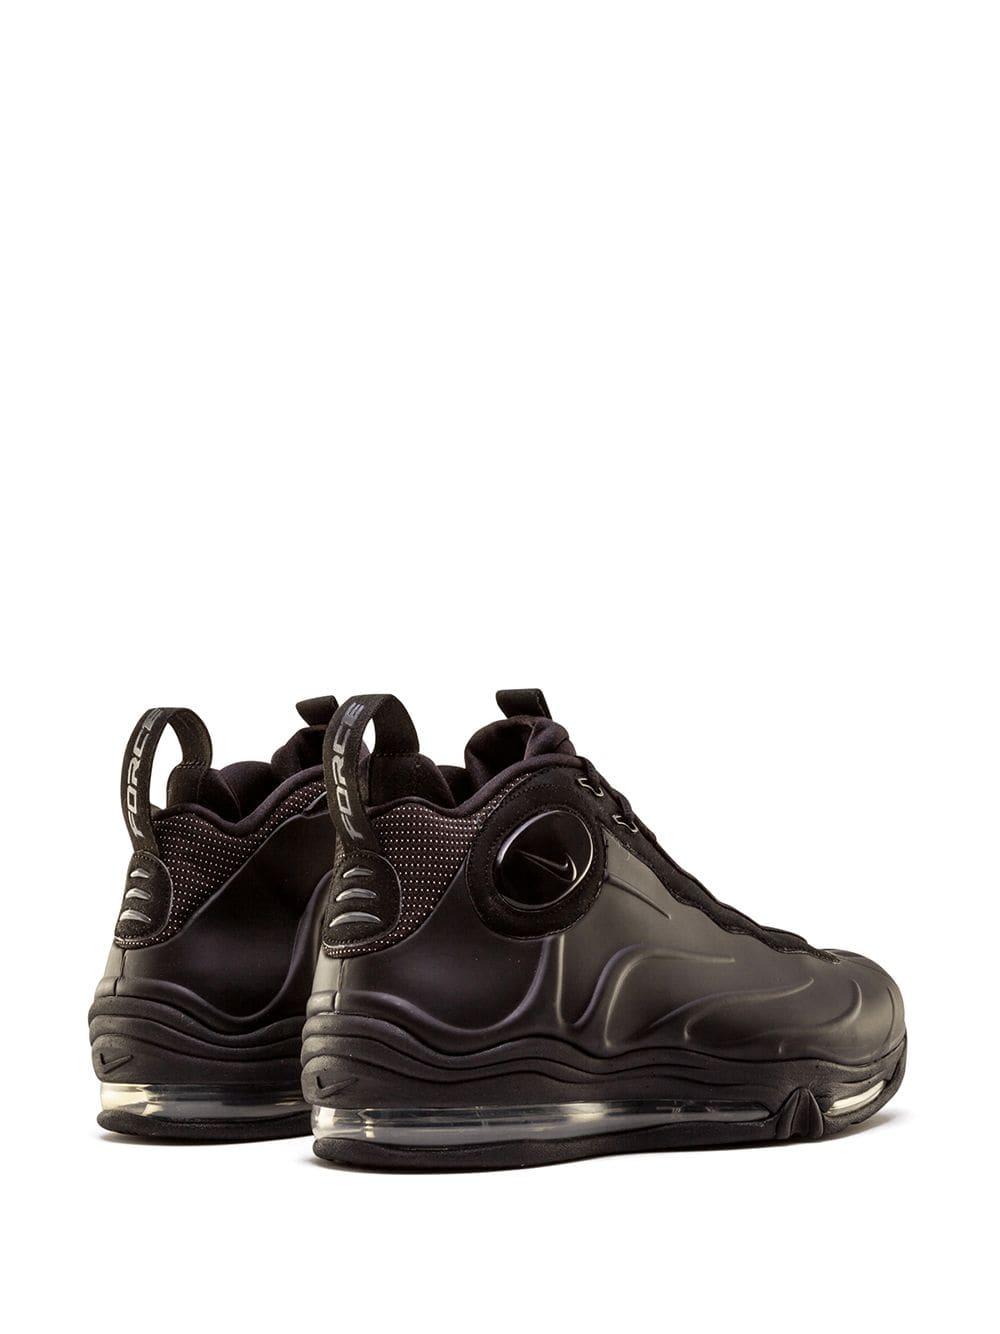 Nike Leather Total Air Foamposite Max Sneakers in Black for Men - Lyst